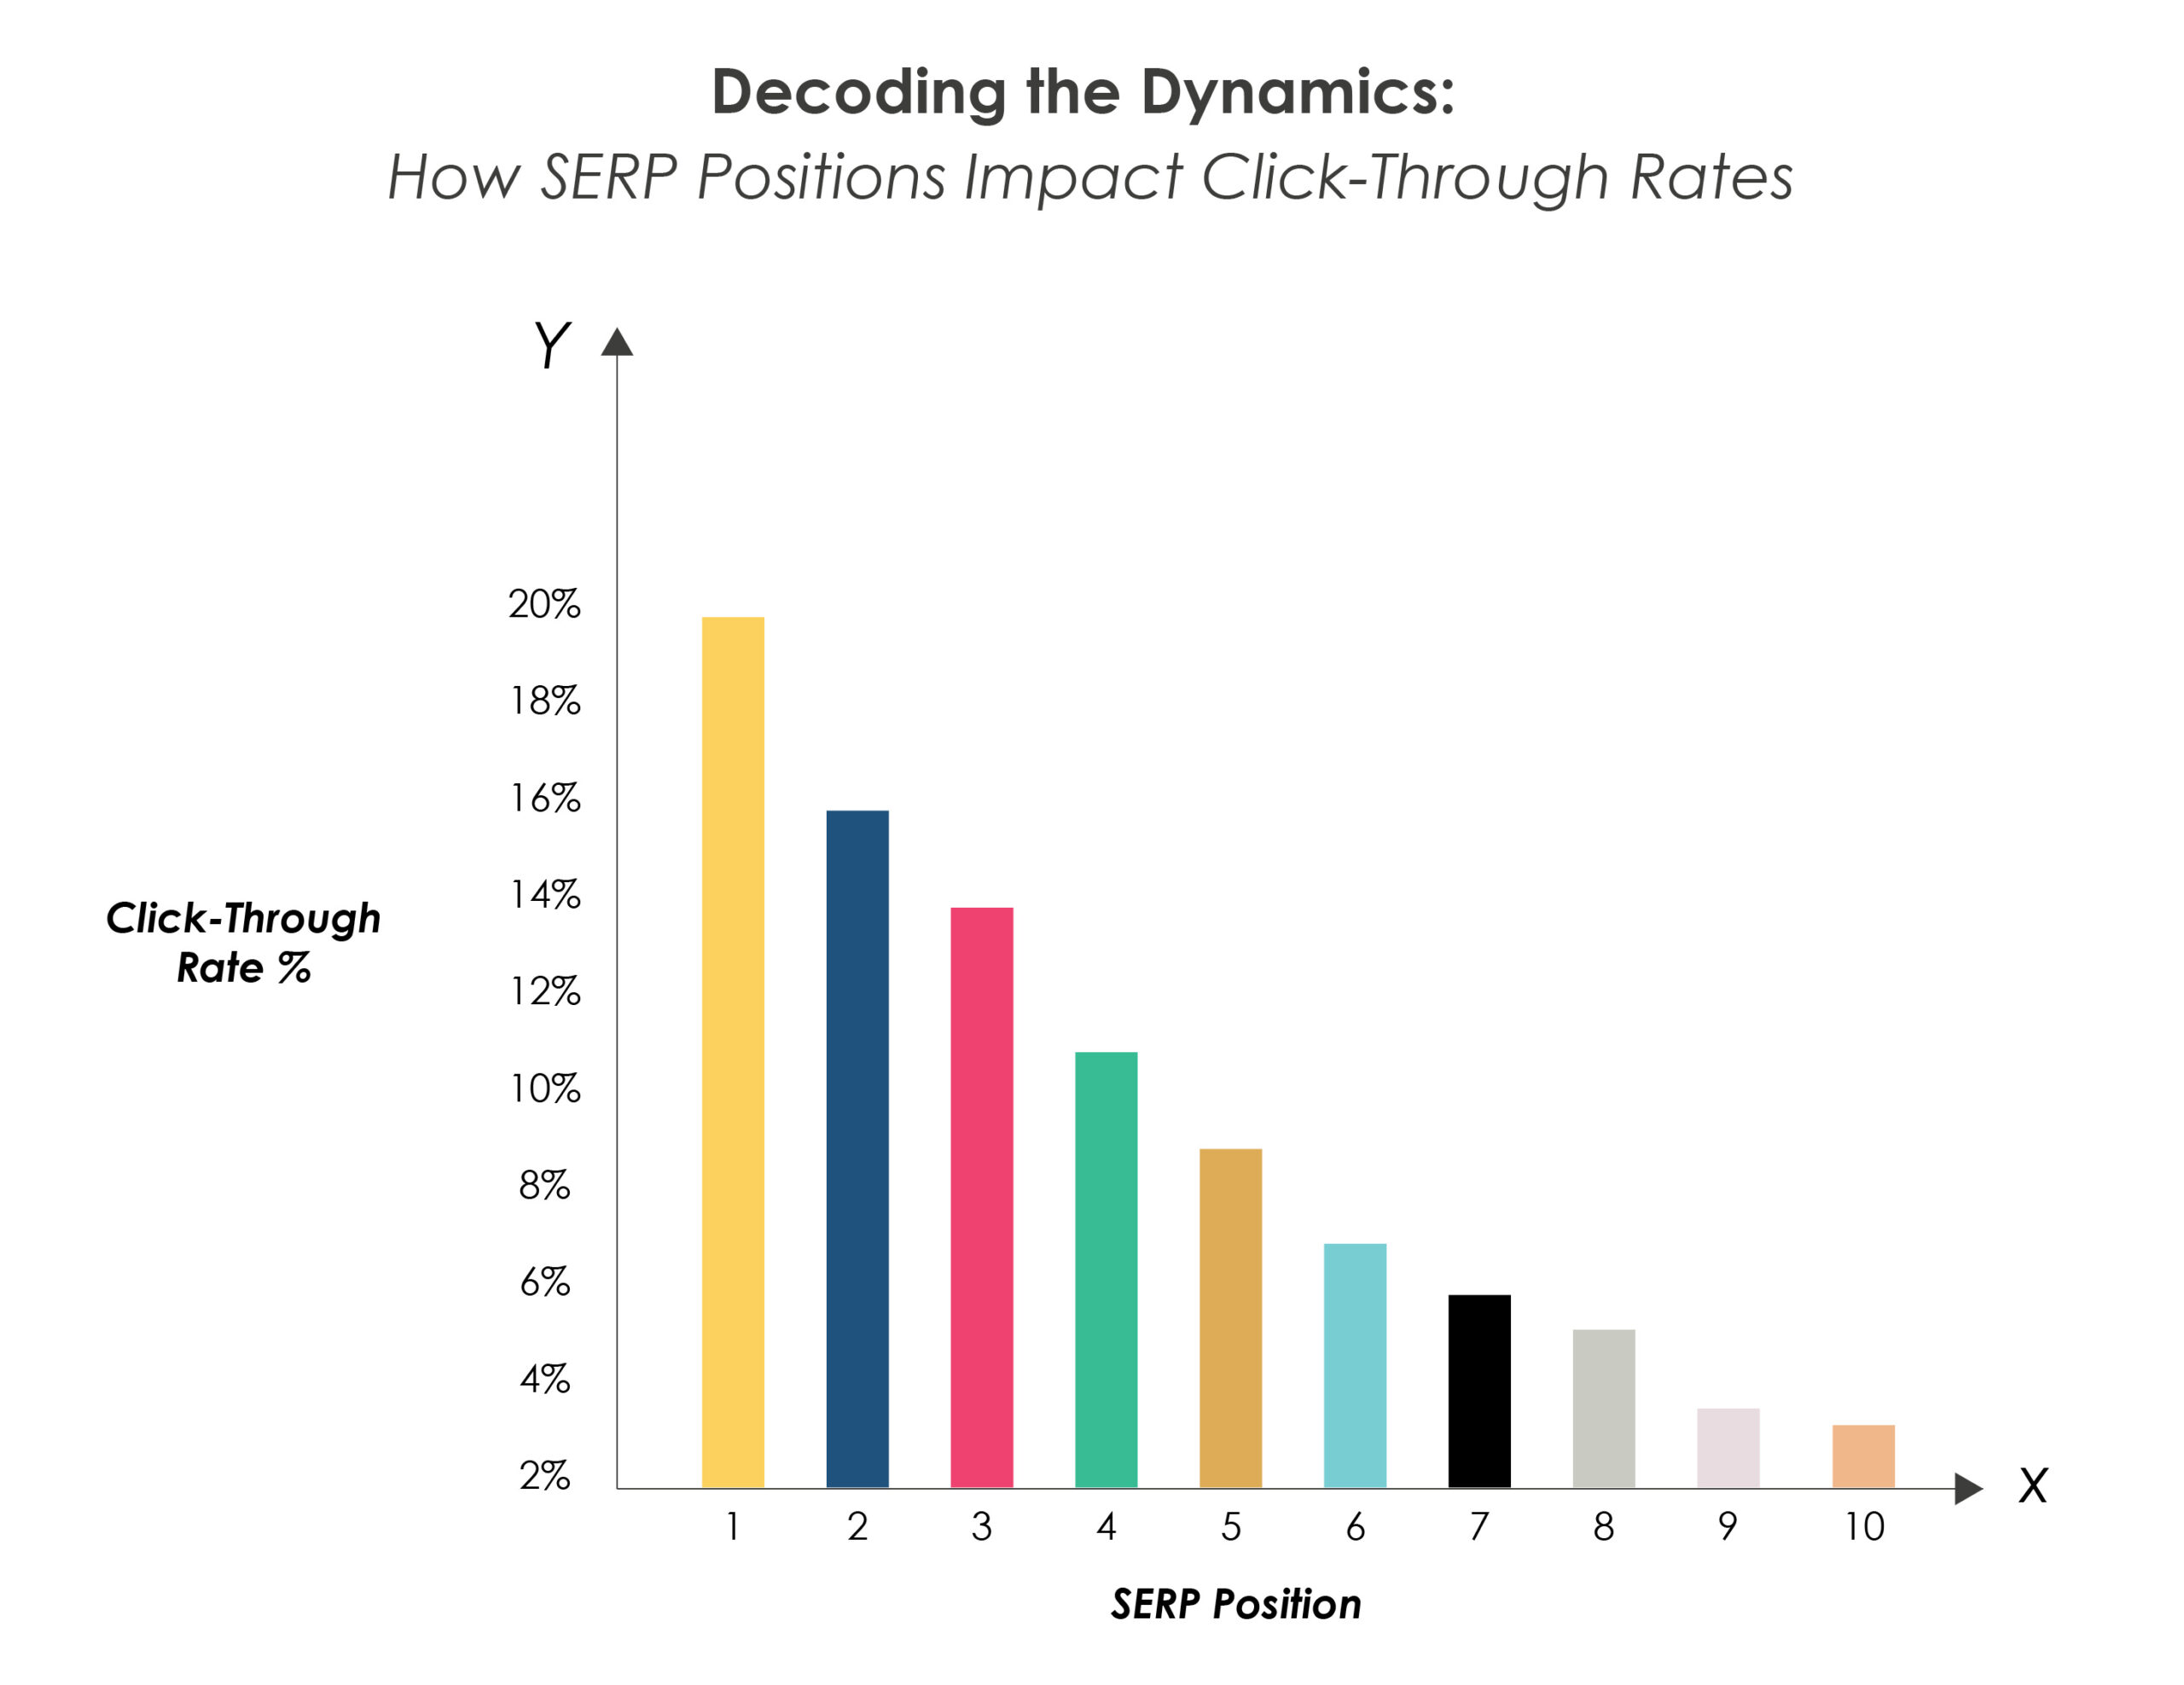 Decoding the Dynamics: How SERP Positions Impact Click-Through